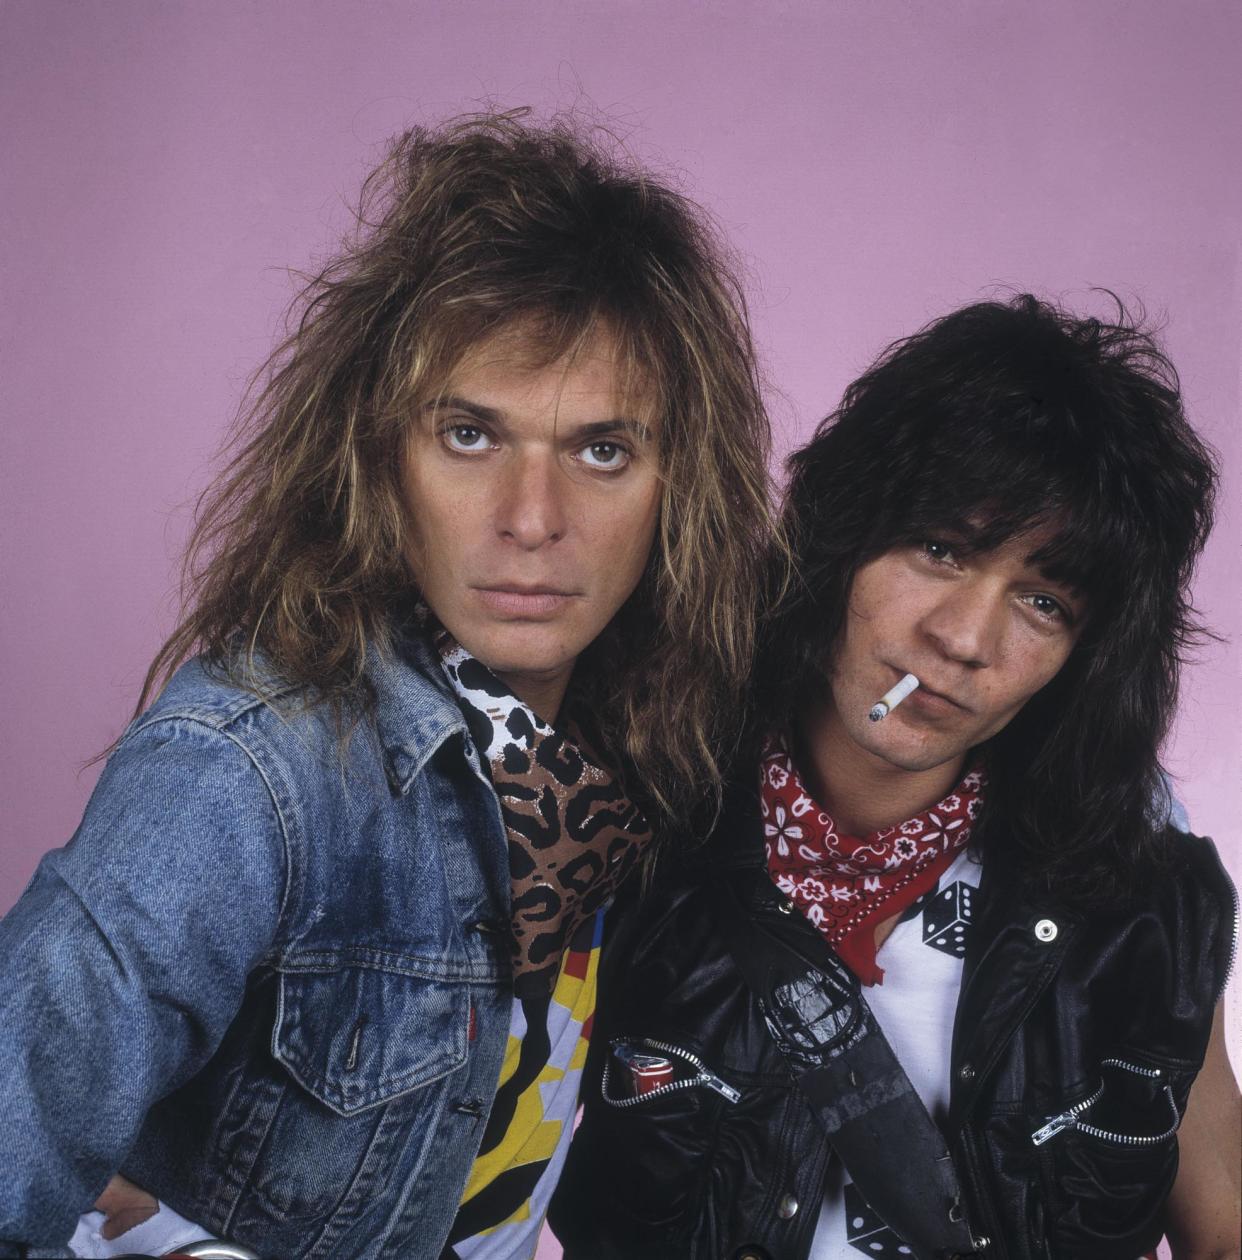 David Lee Roth and Eddie Van Halen in 1984. Eddie told Blair Roth was only interested in “dance music” and doing his “Vaudeville shtick” on stage. - Credit: Andy Freeberg/Getty Images